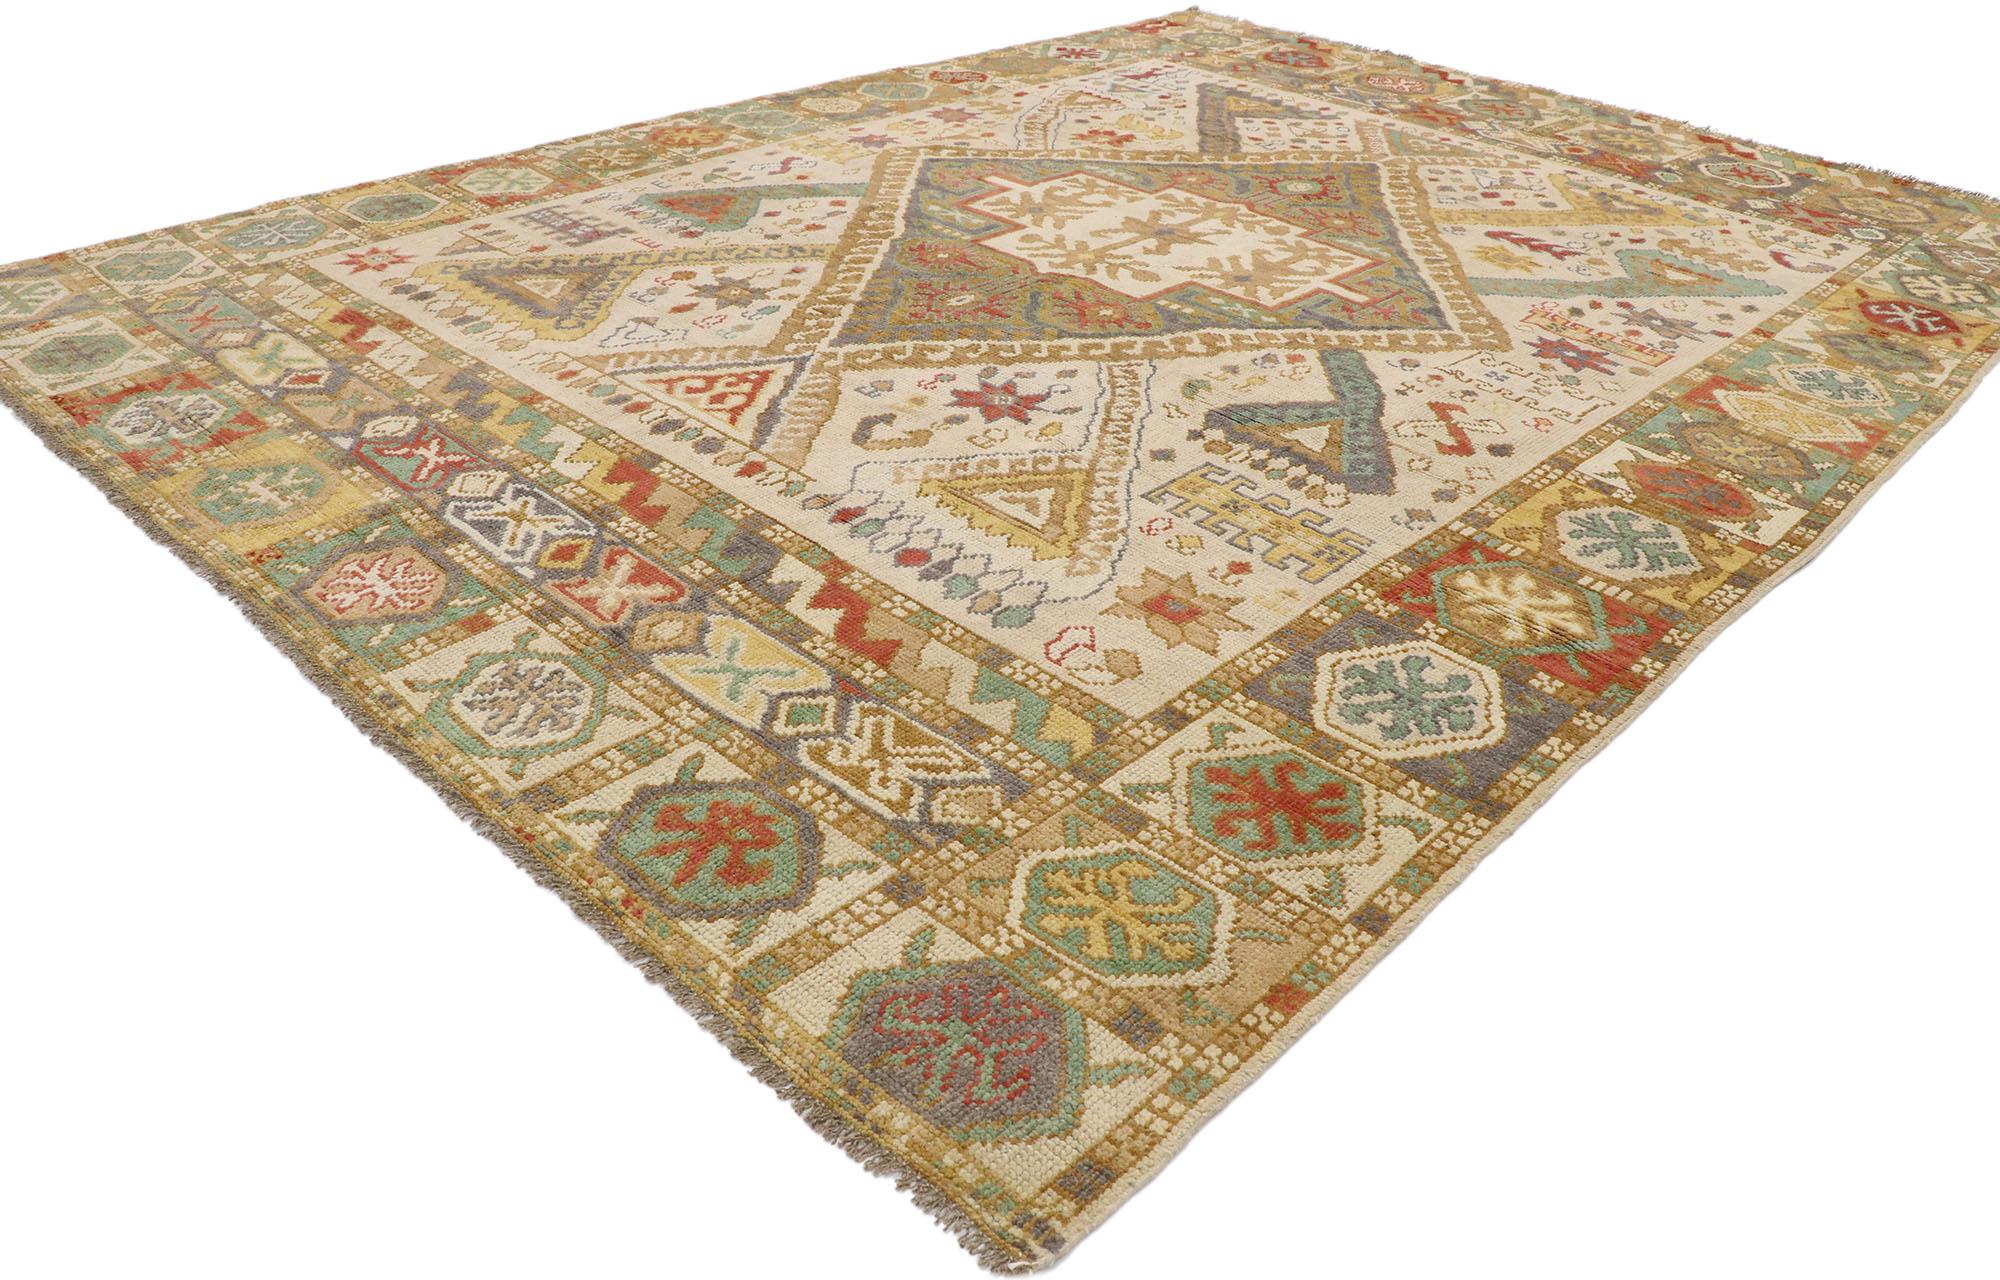 80638, new contemporary Oushak style rug with Modern tribal design. With tribal charm and timeless appeal in an earthy-inspired colorway, this hand knotted wool contemporary Oushak rug will take on a curated lived-in look that feels timeless while